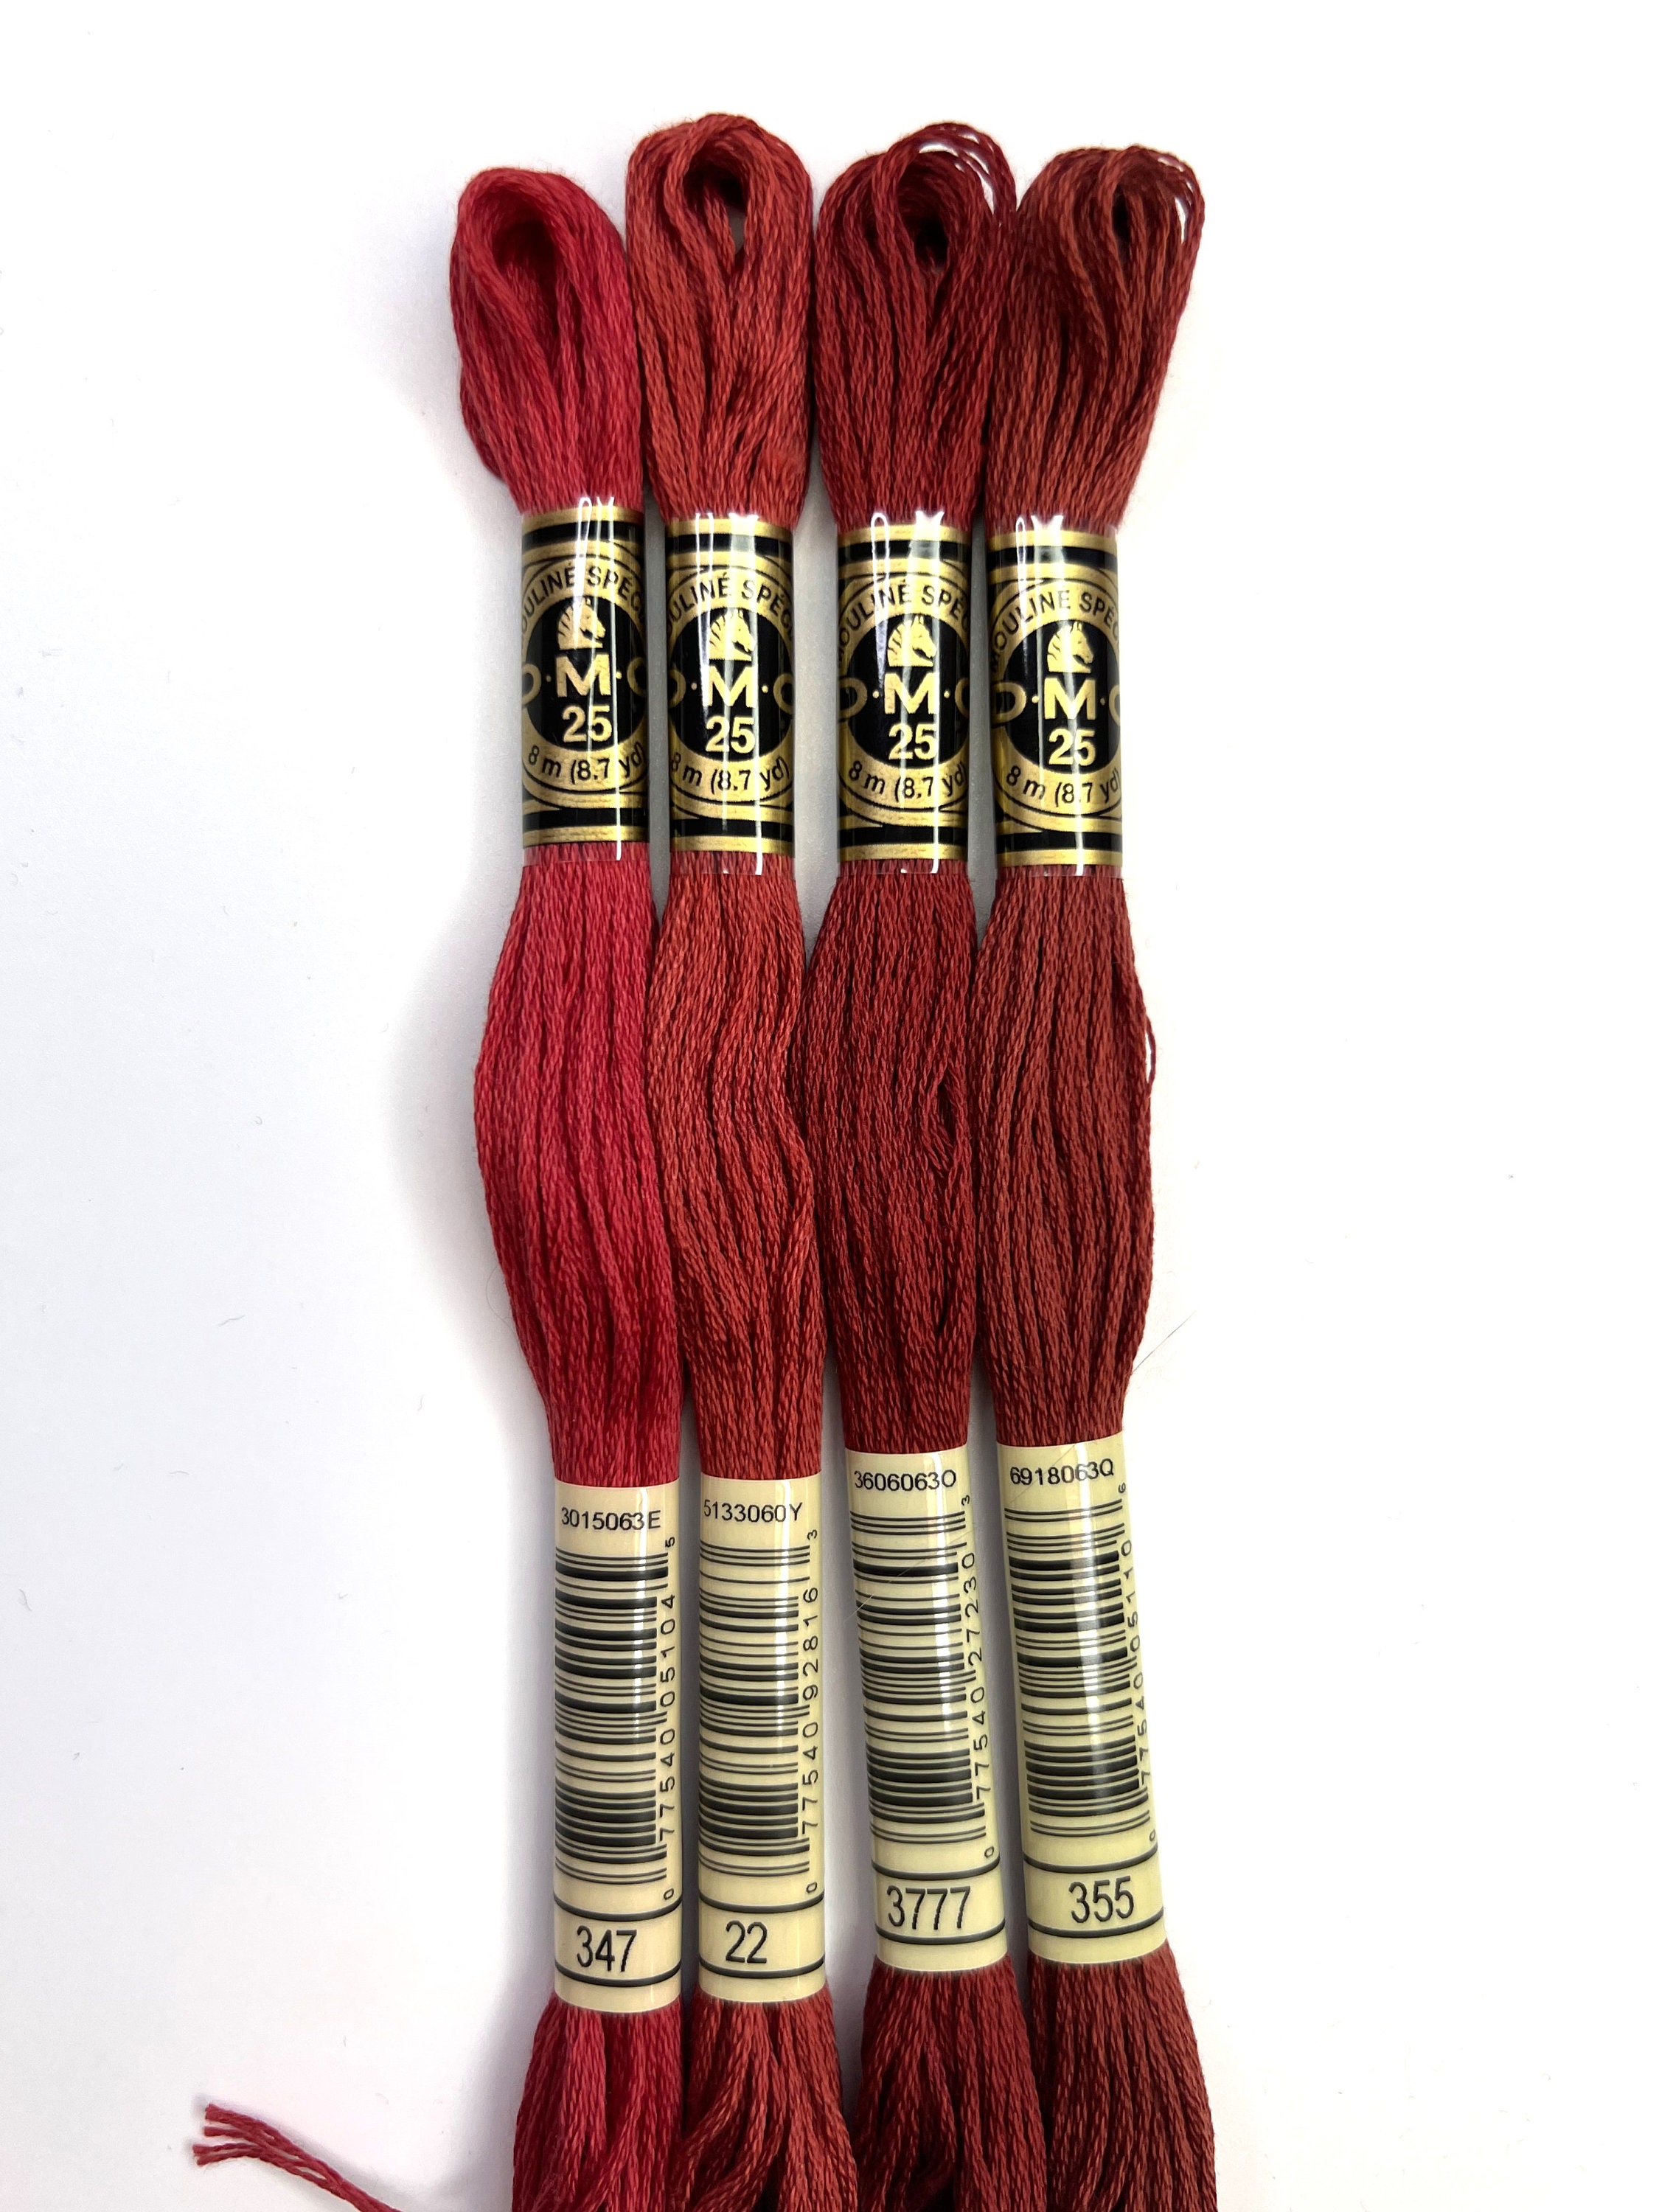 Presencia Finca Mouline Embroidery Floss in Red, Orange, Brown Shades1667 /  